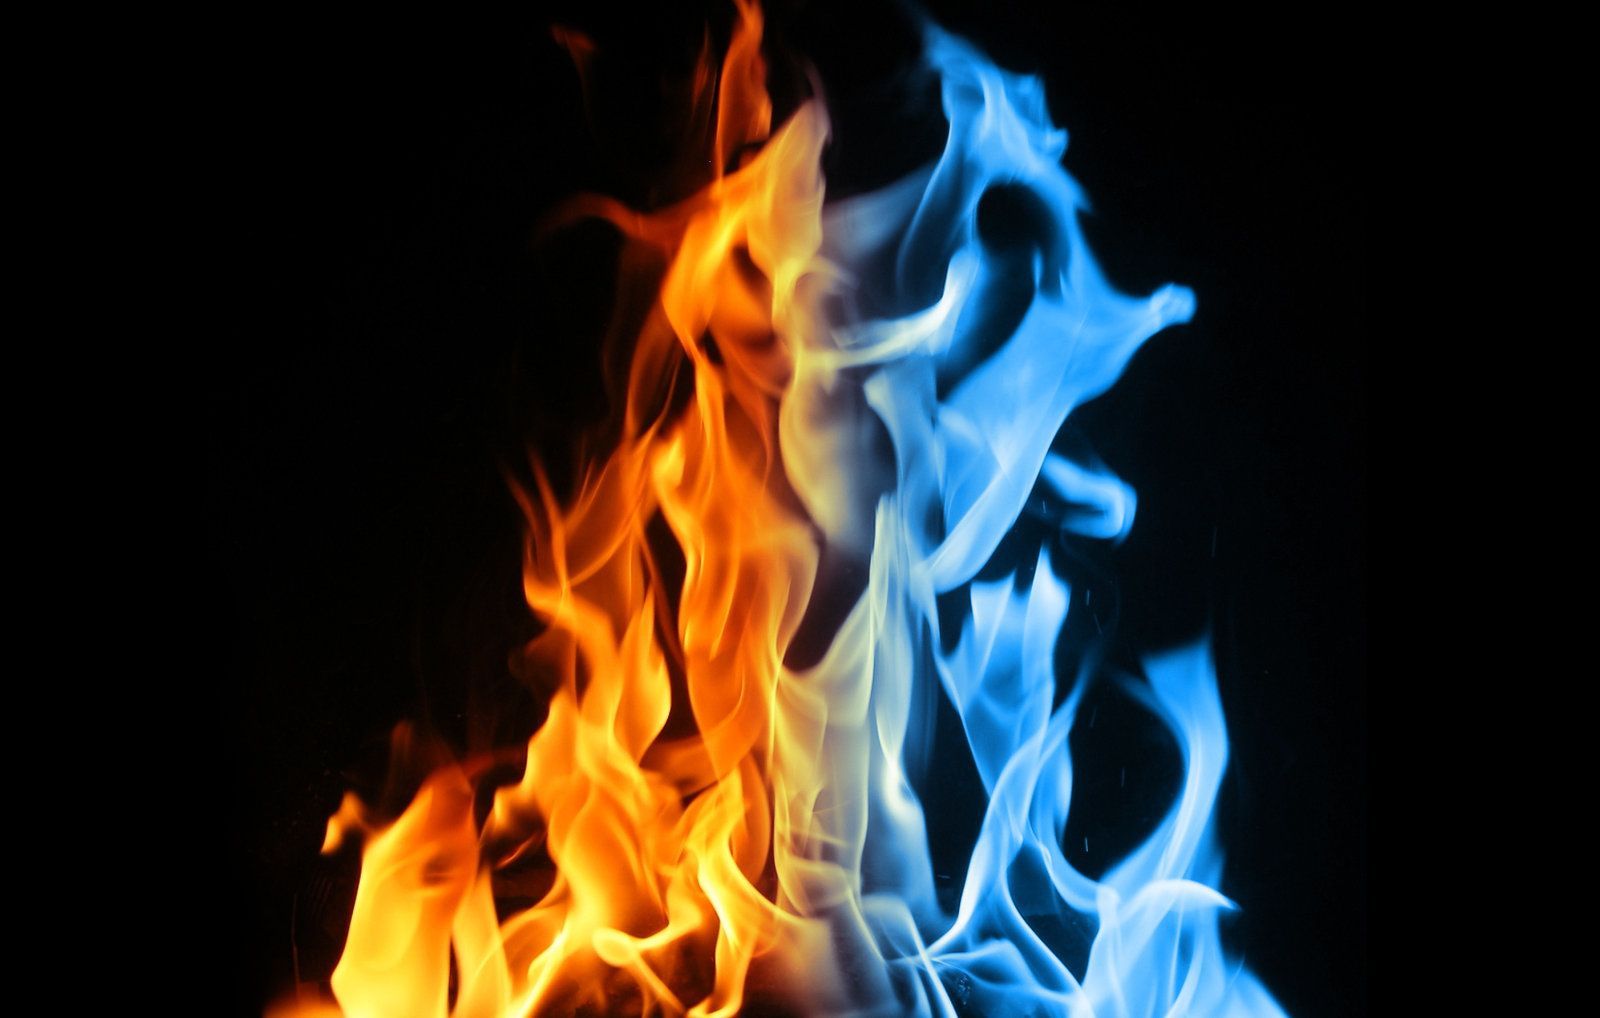 Fire and ice, Fire vs water, Fire art.com